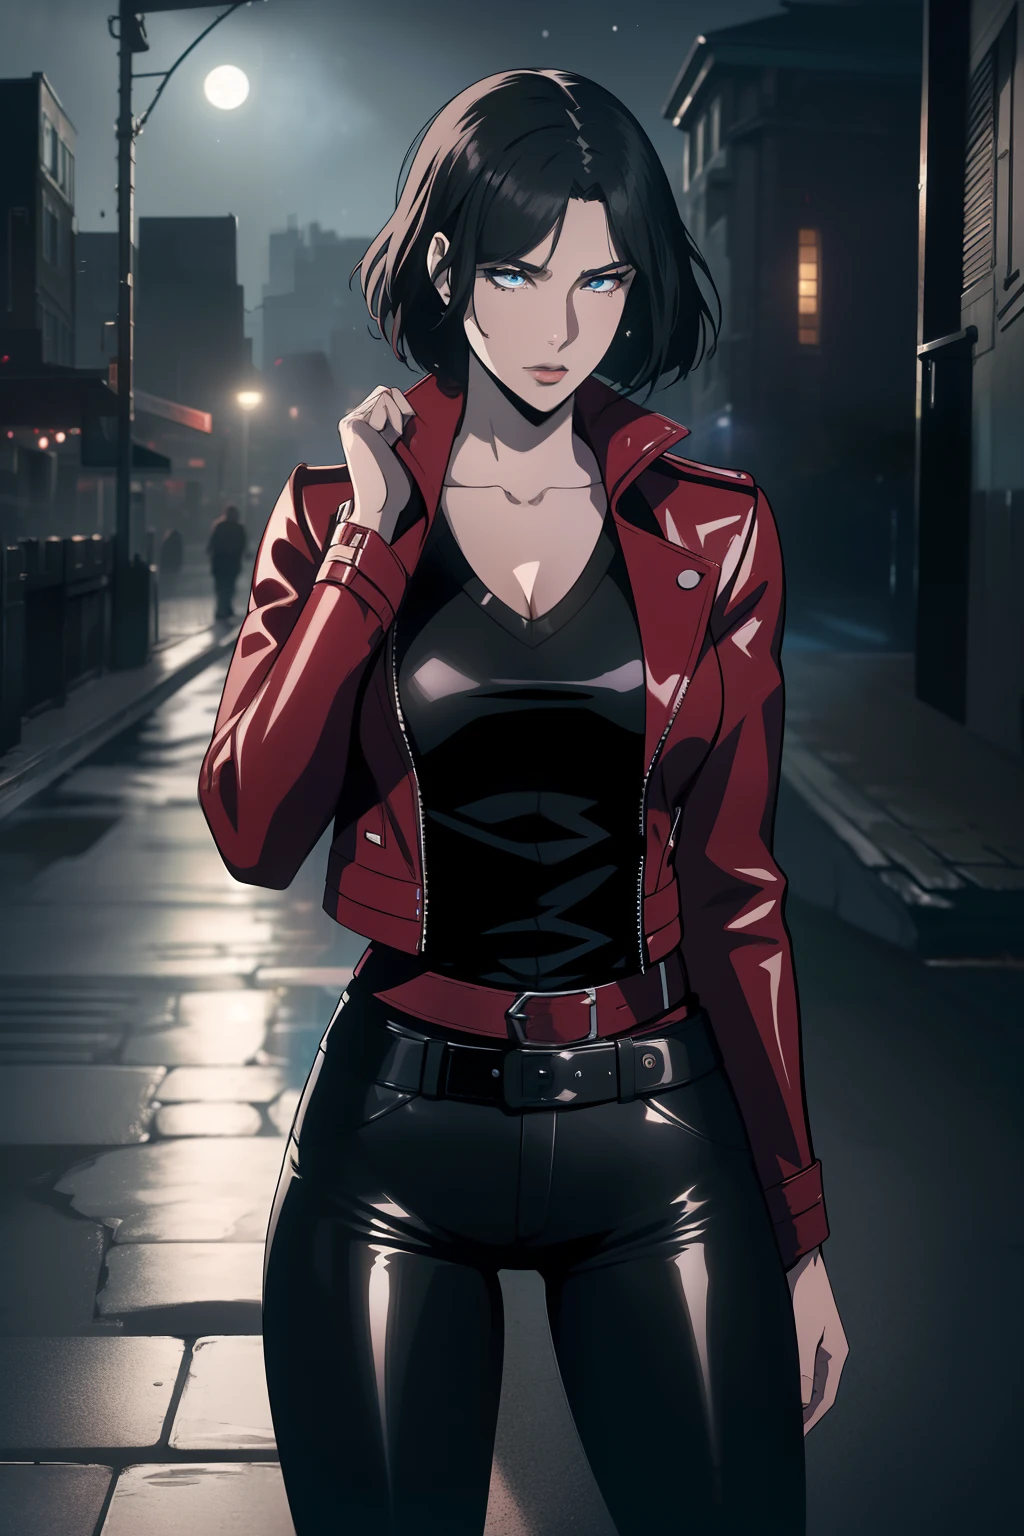 (Masterpiece, Best Quality), (A Gorgeous 25 Years Old British Female Vampire Mercenary), (Wavy Bobcut Black Hair:1.4), (Pale Skin:1.2), (Blue Eyes), (Serious Looking), (Wearing Red Leather Jacket, Black V-Neck Inner Shirt, and Black Tight Pants:1.6), (Busty Chest Size:1.4), (Dynamic Pose:1.4), (City Road at Night with Moonlight:1.6), Centered, (Waist-up Shot:1.4), From Front Shot, Insane Details, Intricate Face Detail, Intricate Hand Details, Cinematic Shot and Lighting, Realistic and Vibrant Colors, Masterpiece, Sharp Focus, Ultra Detailed, Taken with DSLR camera, Depth of Field, Incredibly Realistic Environment and Scene, Master Composition and Cinematography, castlevania style